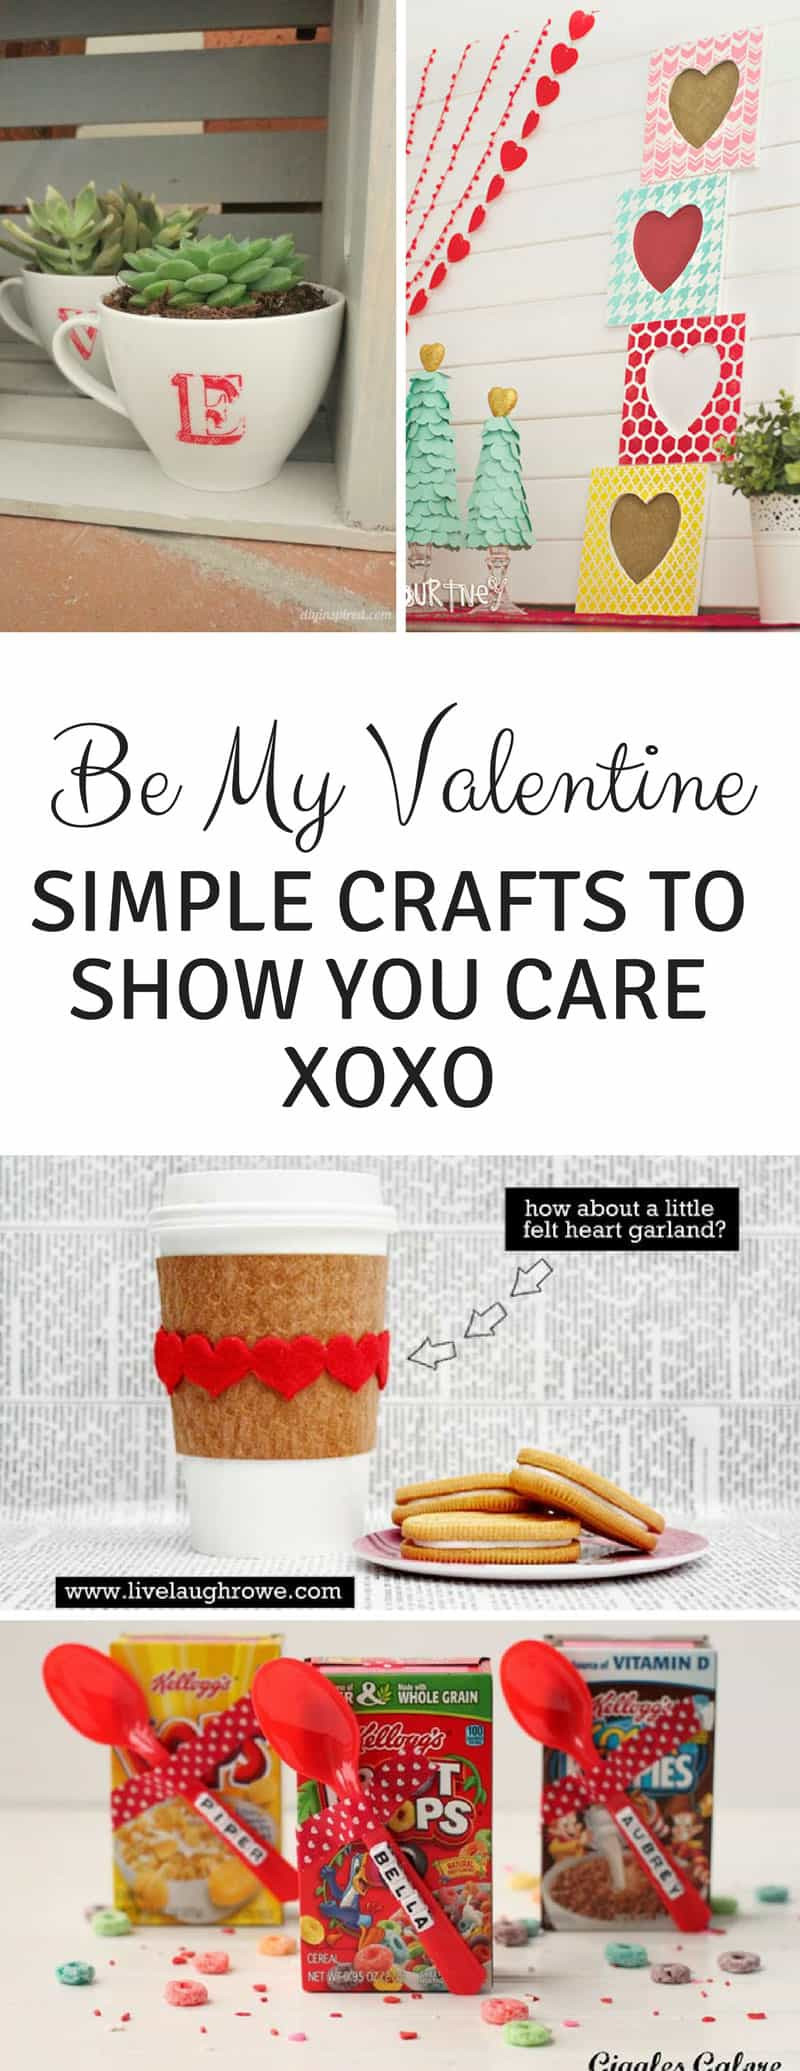 February Craft Ideas For Adults
 Super Simple Valentine s Day Crafts for Adults Spread a